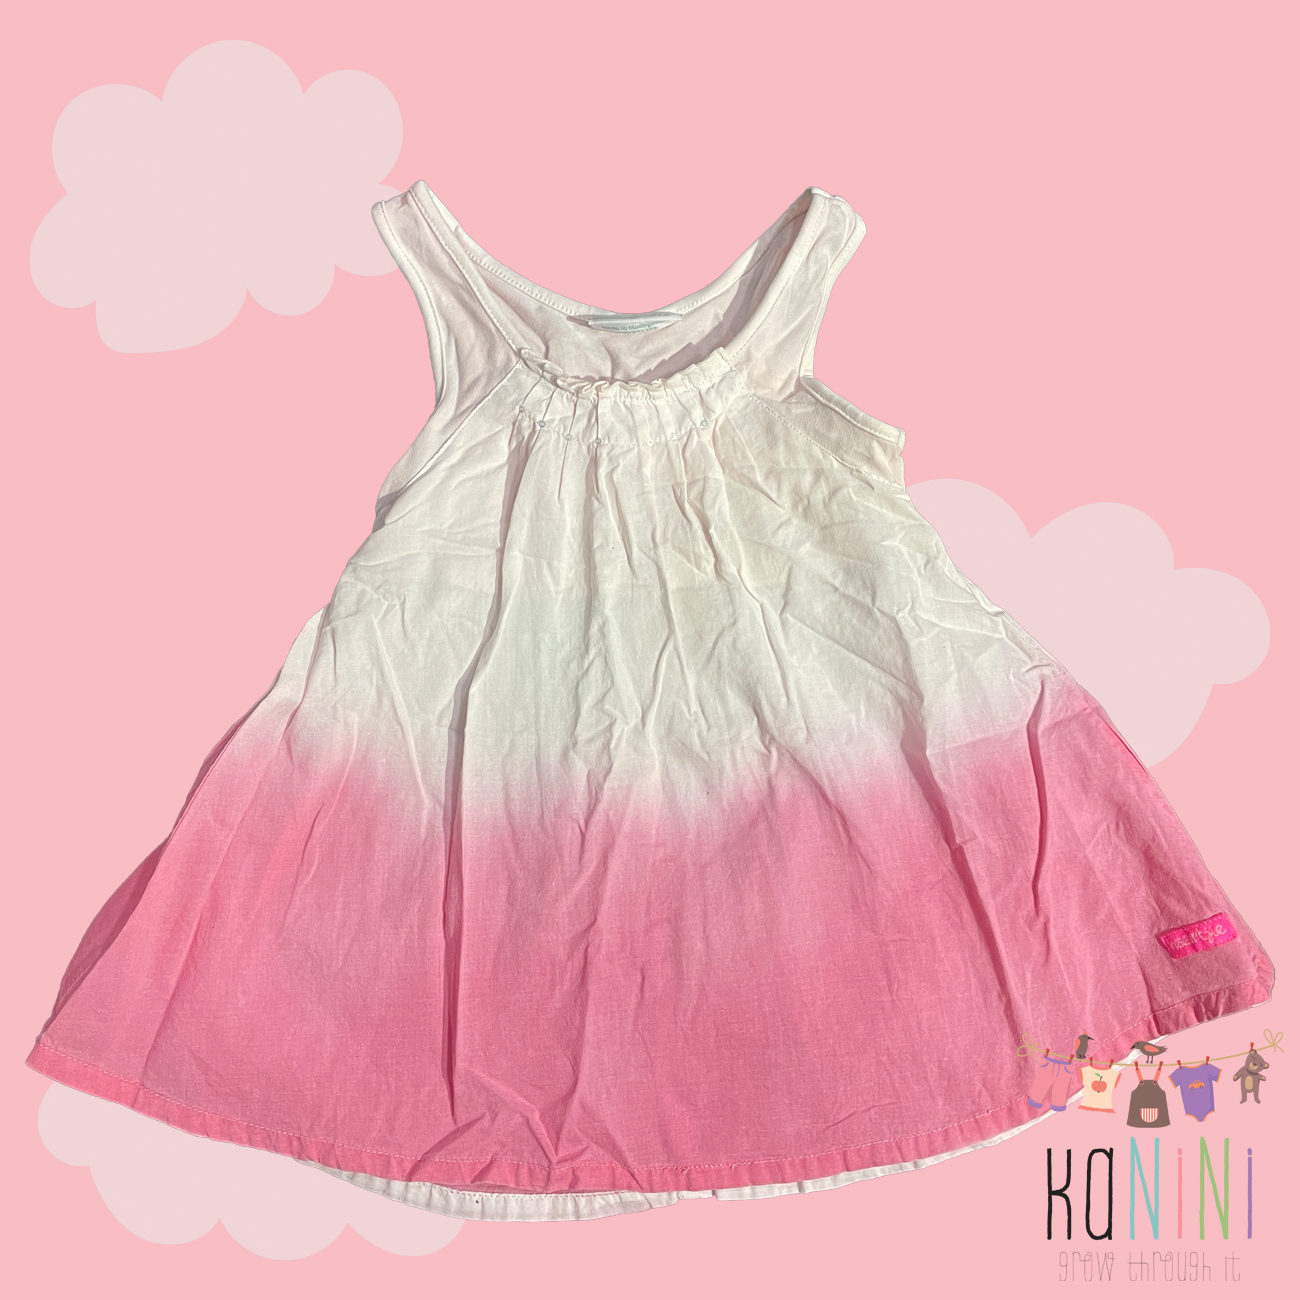 Featured image for “Naartjie 3 - 6 Months Girls Pink Ombre Dress”